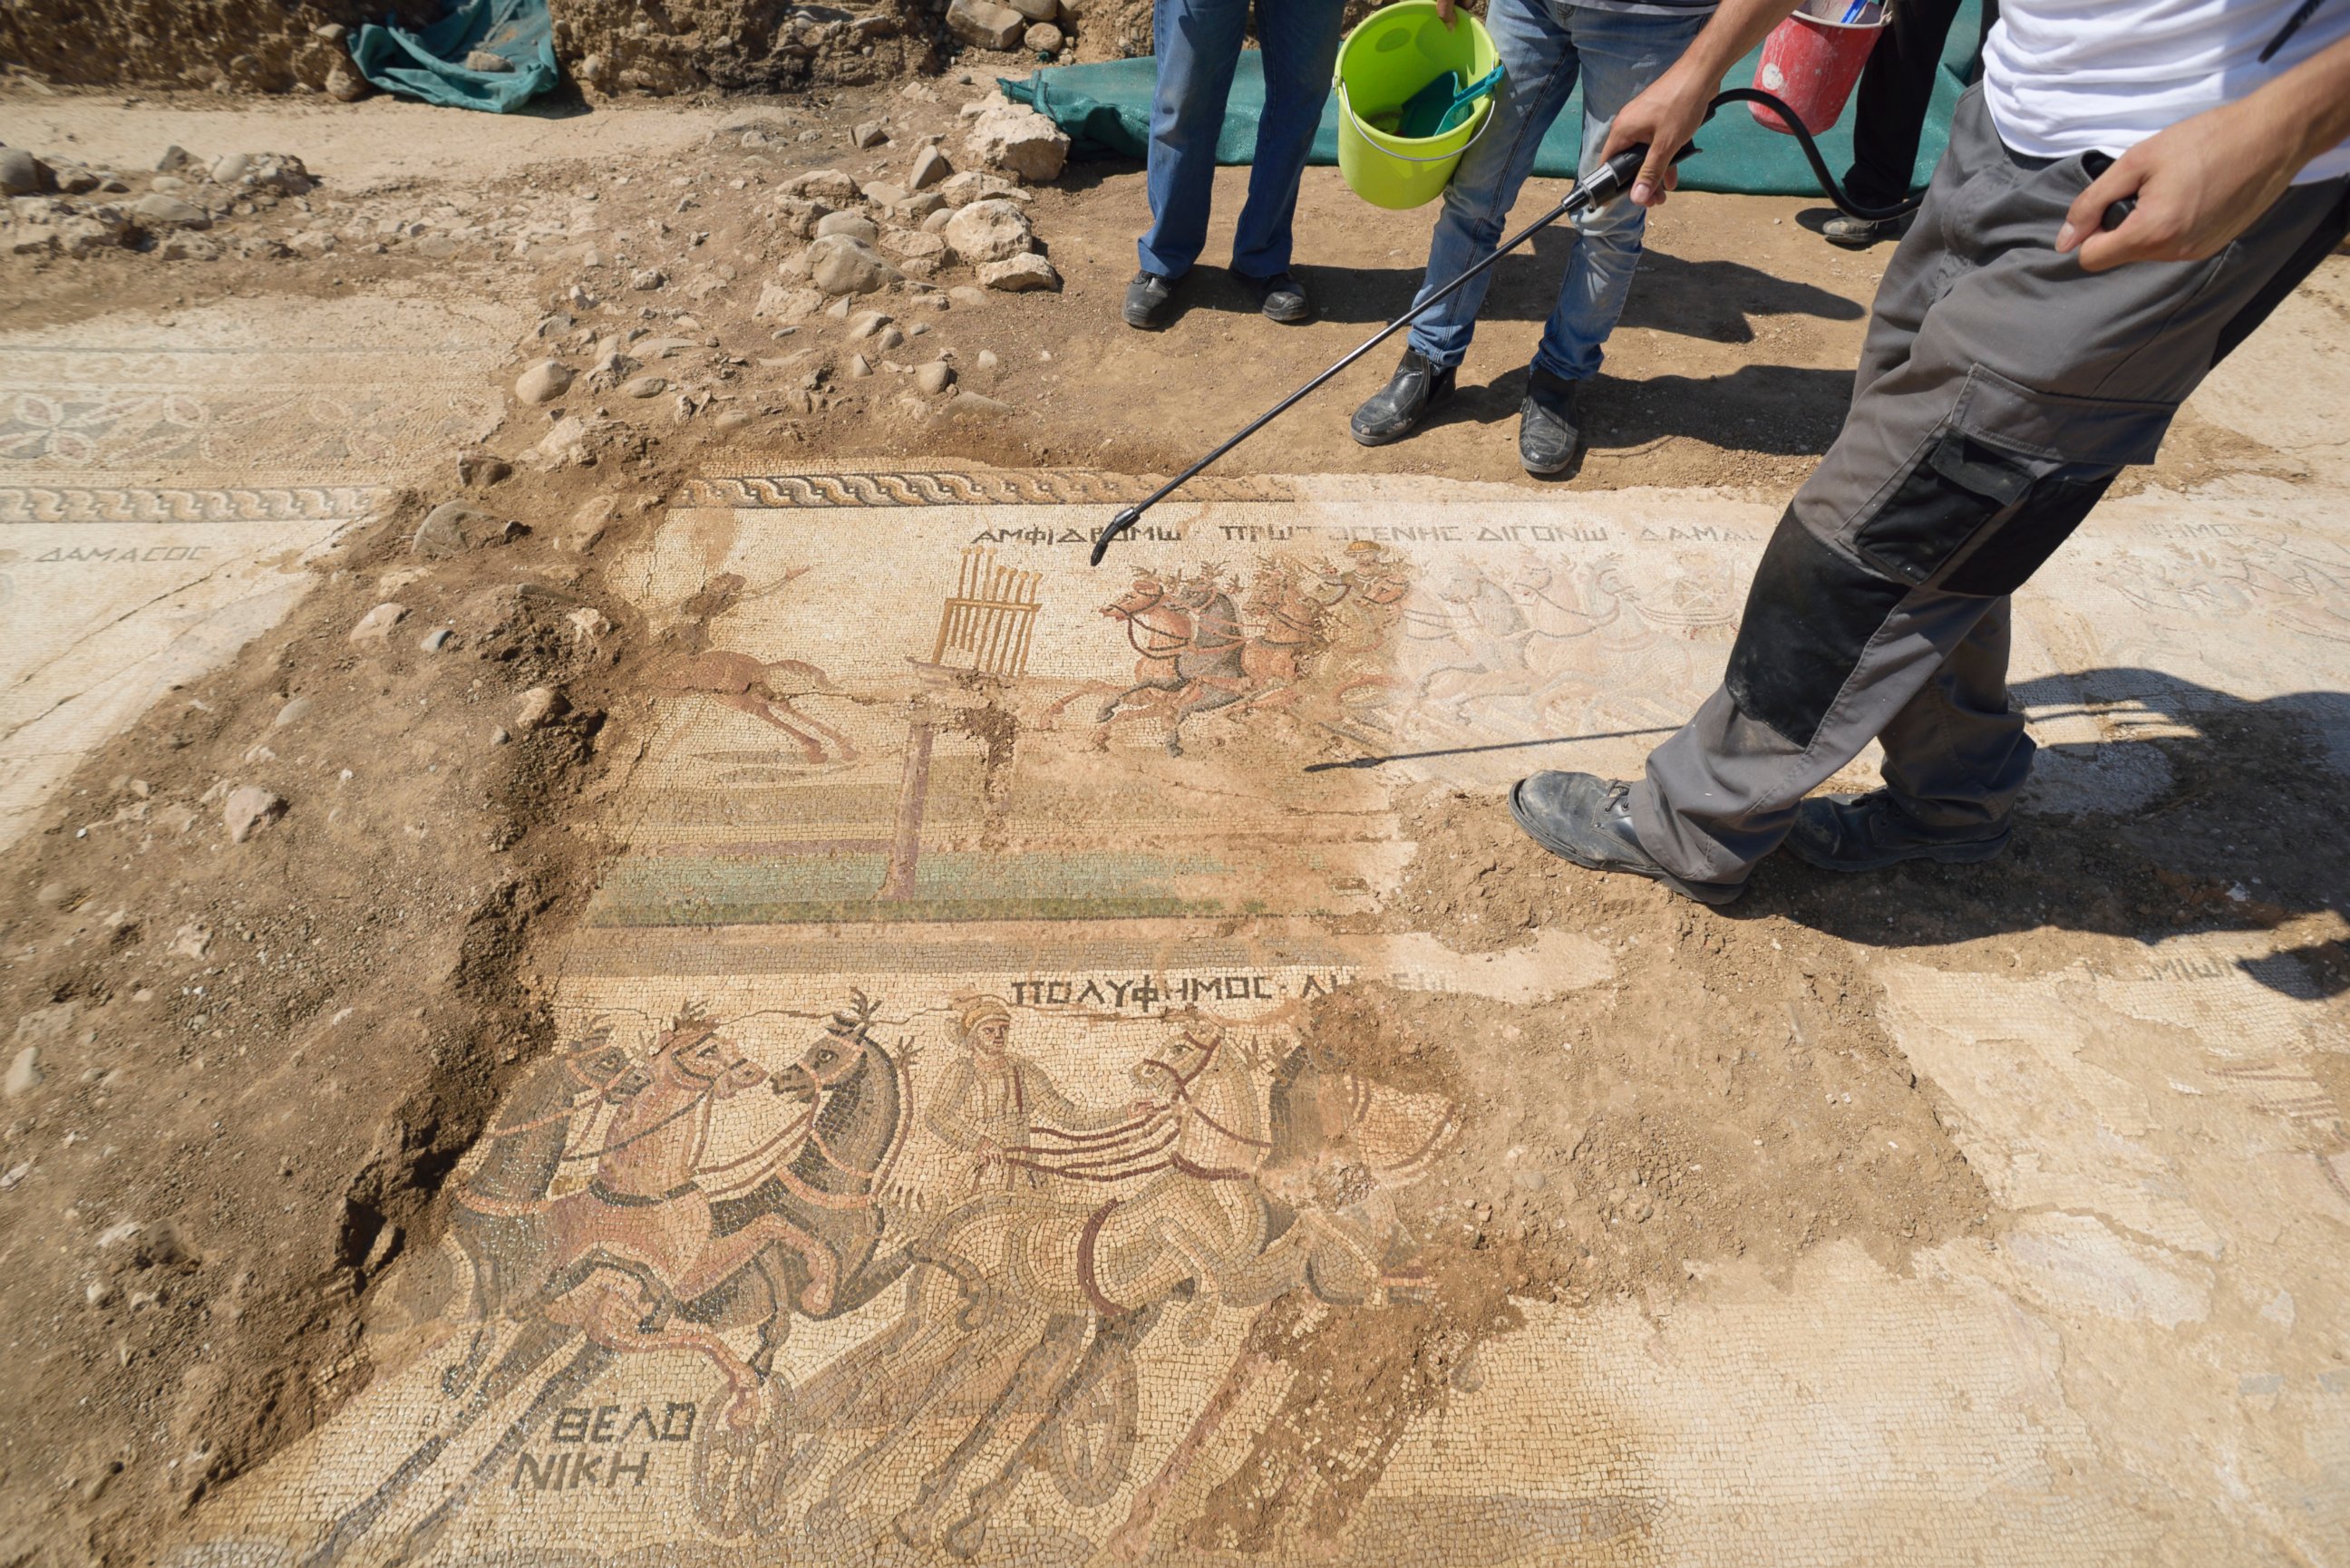 PHOTO: An archeologist sprays water on a rare mosaic floor dating to the 4th century depicting scenes from a chariot race in the hippodrome, in Akaki village outside from capital Nicosia, Cyprus, on Aug. 10, 2016. 